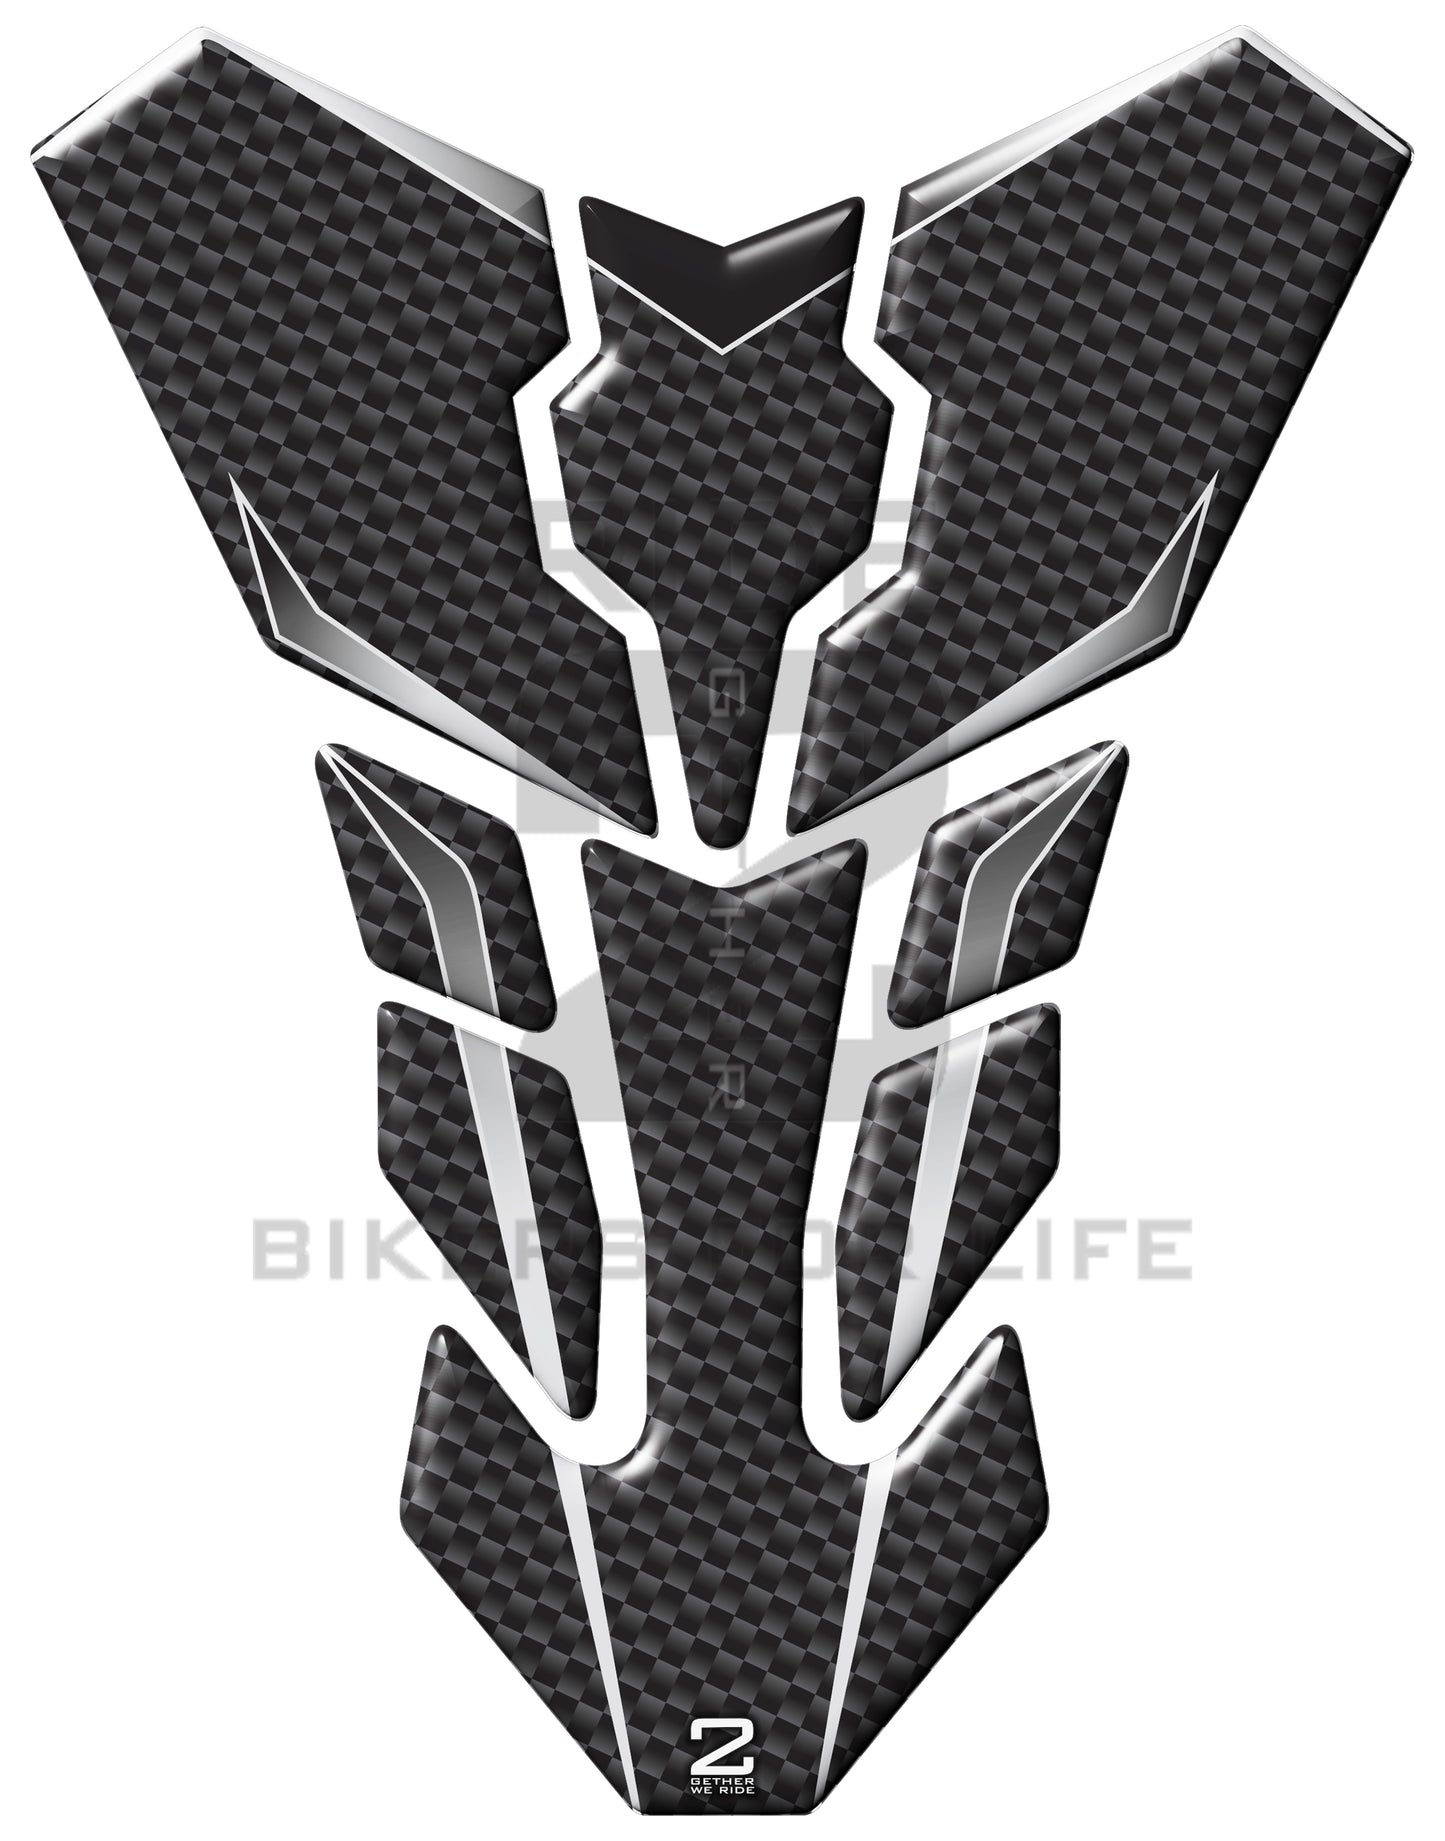 Universal Fit Black and Silver Carbon Fibre Motor Bike Tank Pad Protector. A Street Pad which fits most motorcycles.